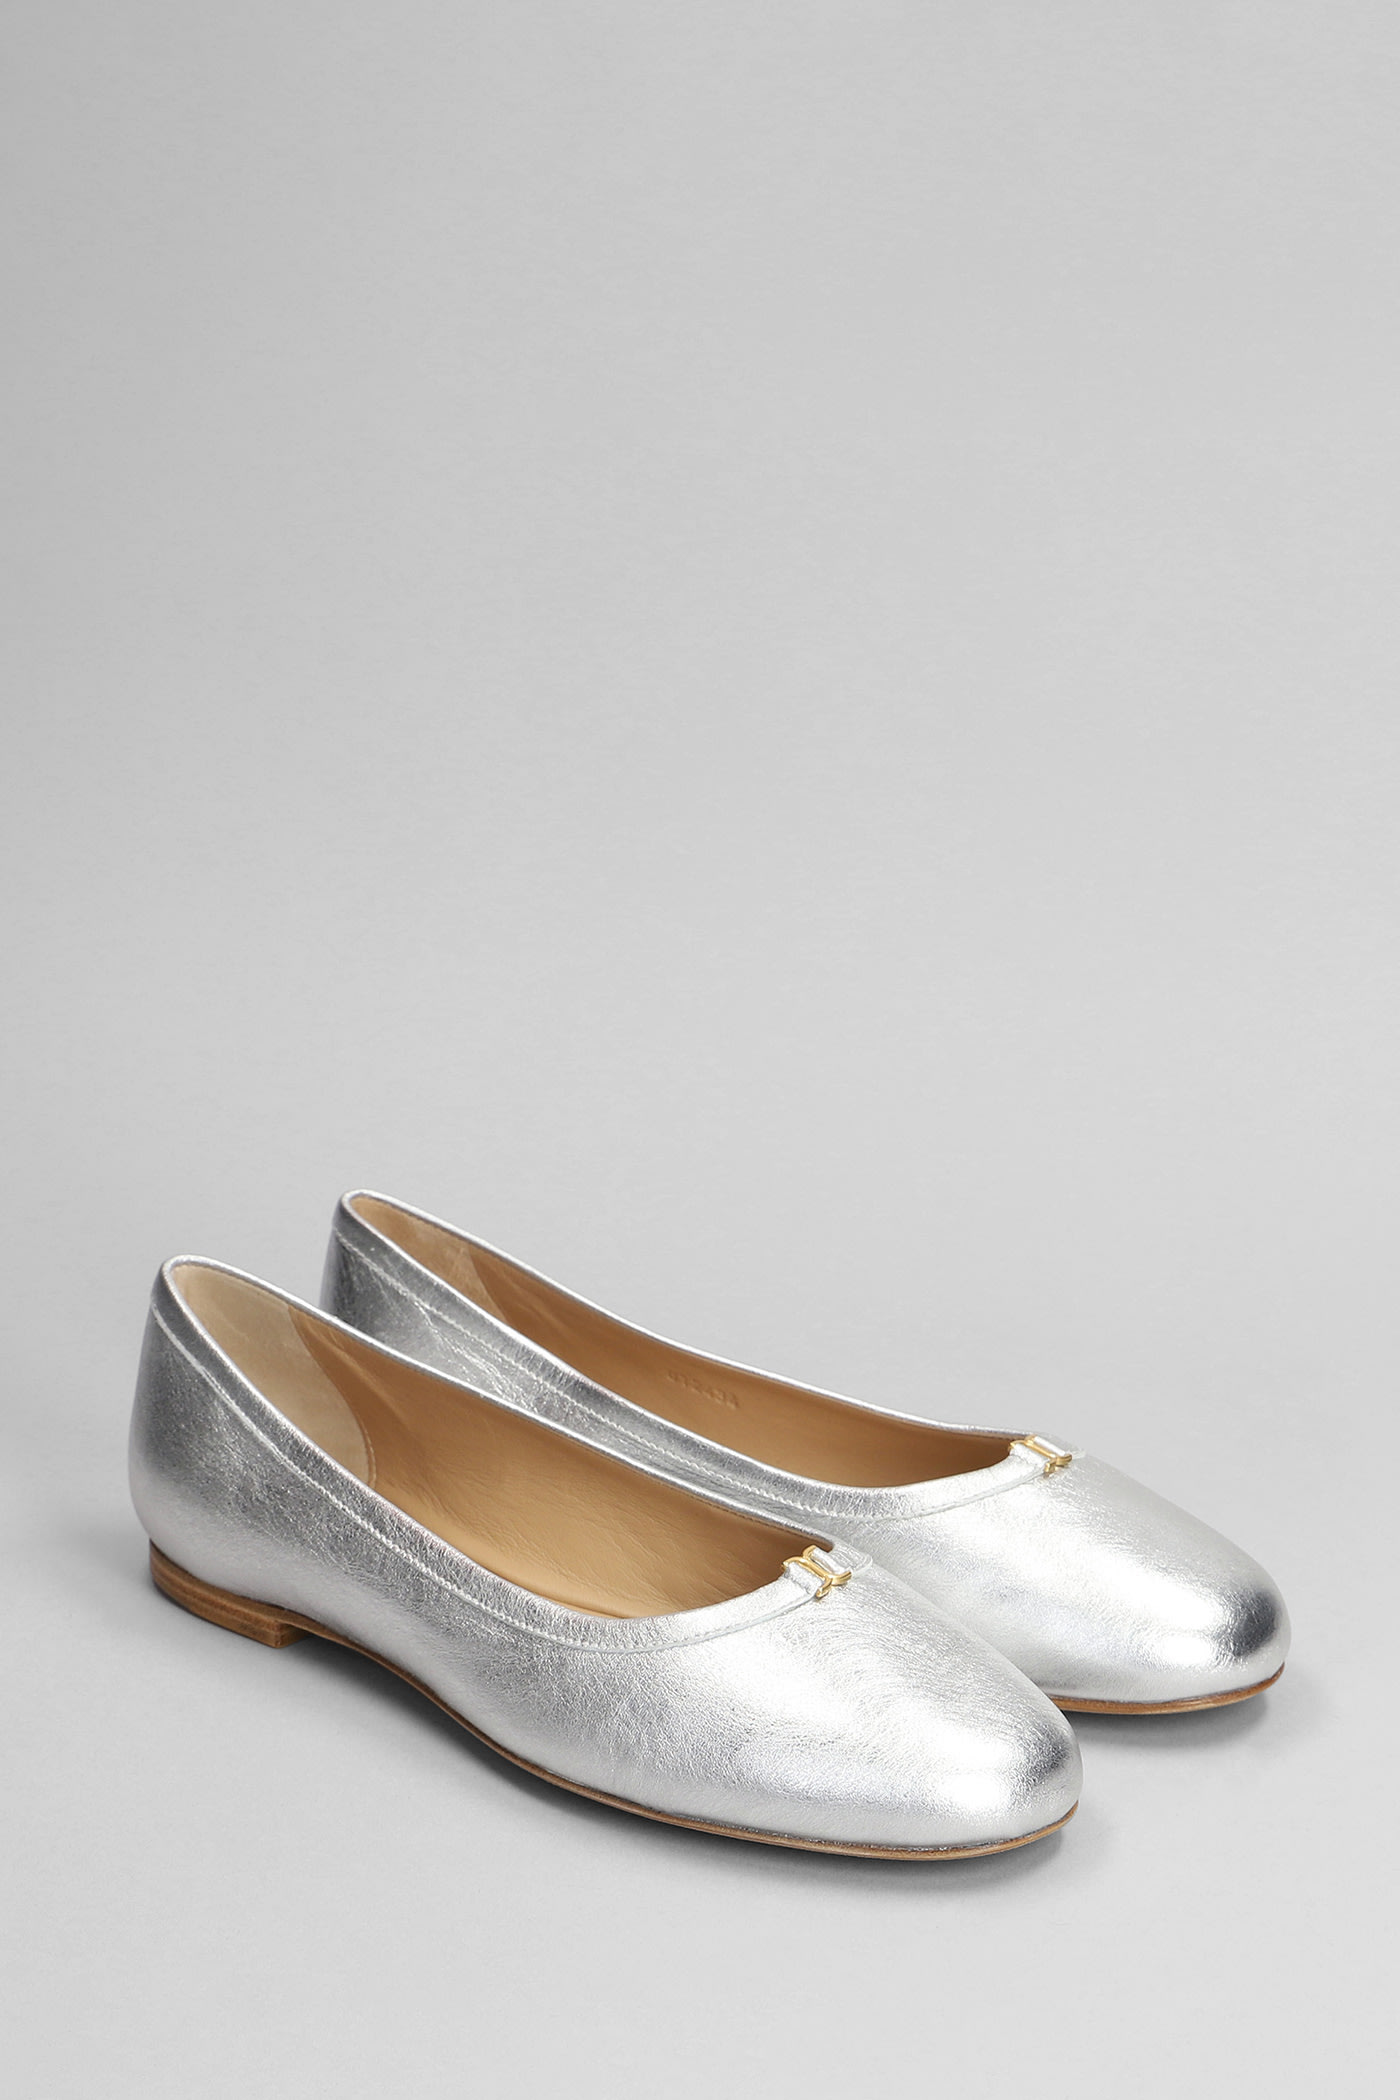 Shop Chloé Mercie Ballet Flats In Silver Leather